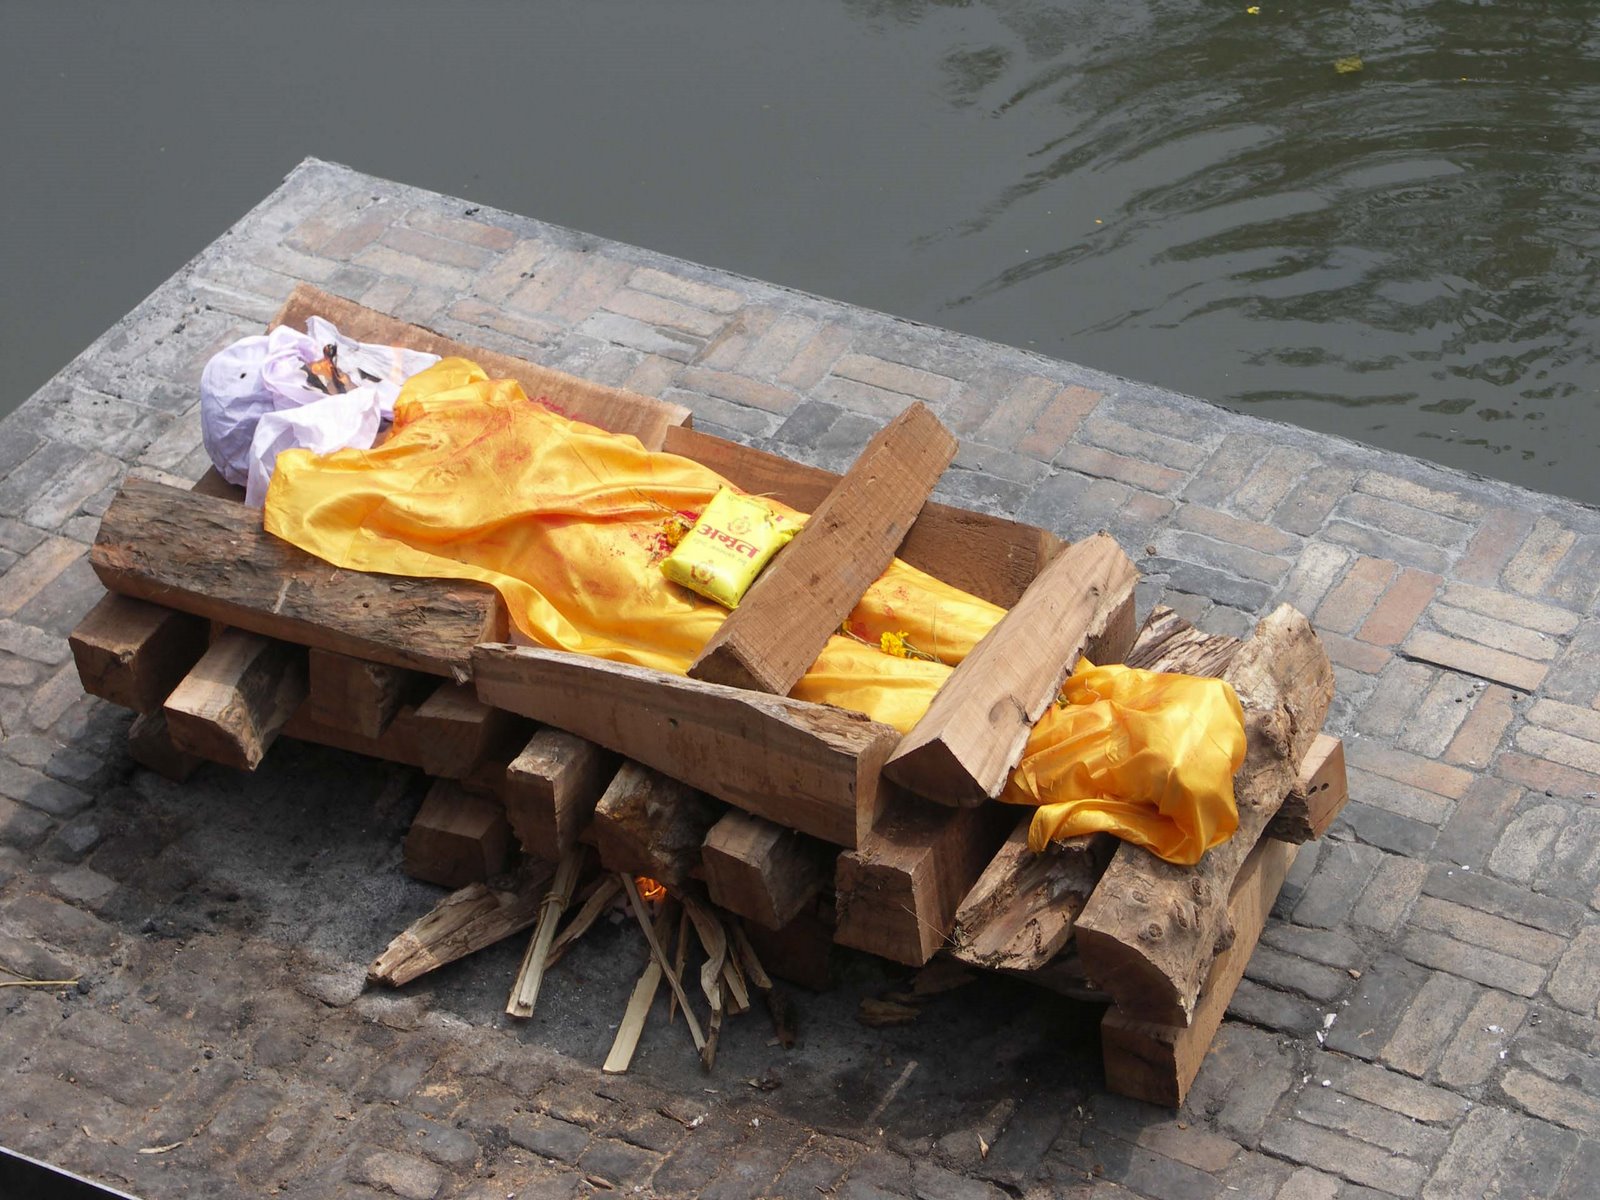 [a175.+Body+prepared+for+cremation,+Pasupatinath.jpg]